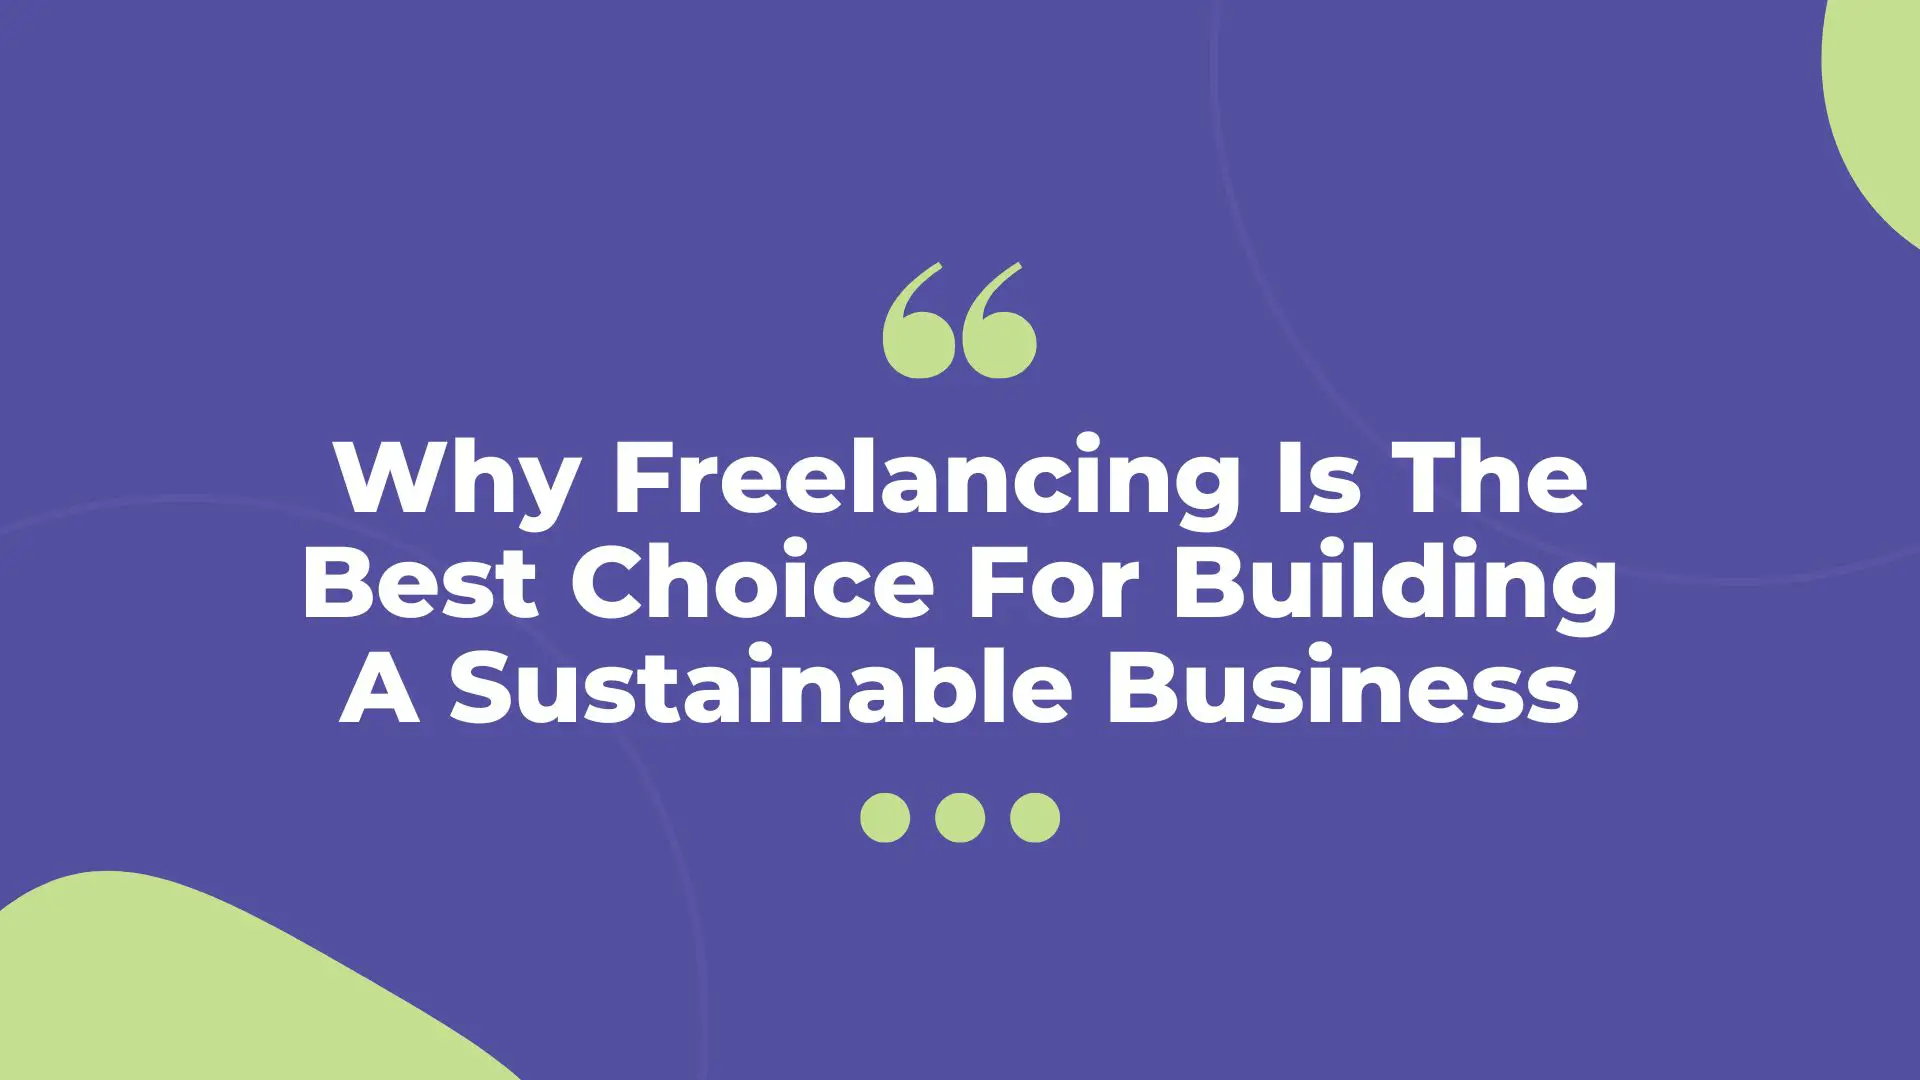 Why Freelancing Is The Best Choice For Building A Sustainable Business